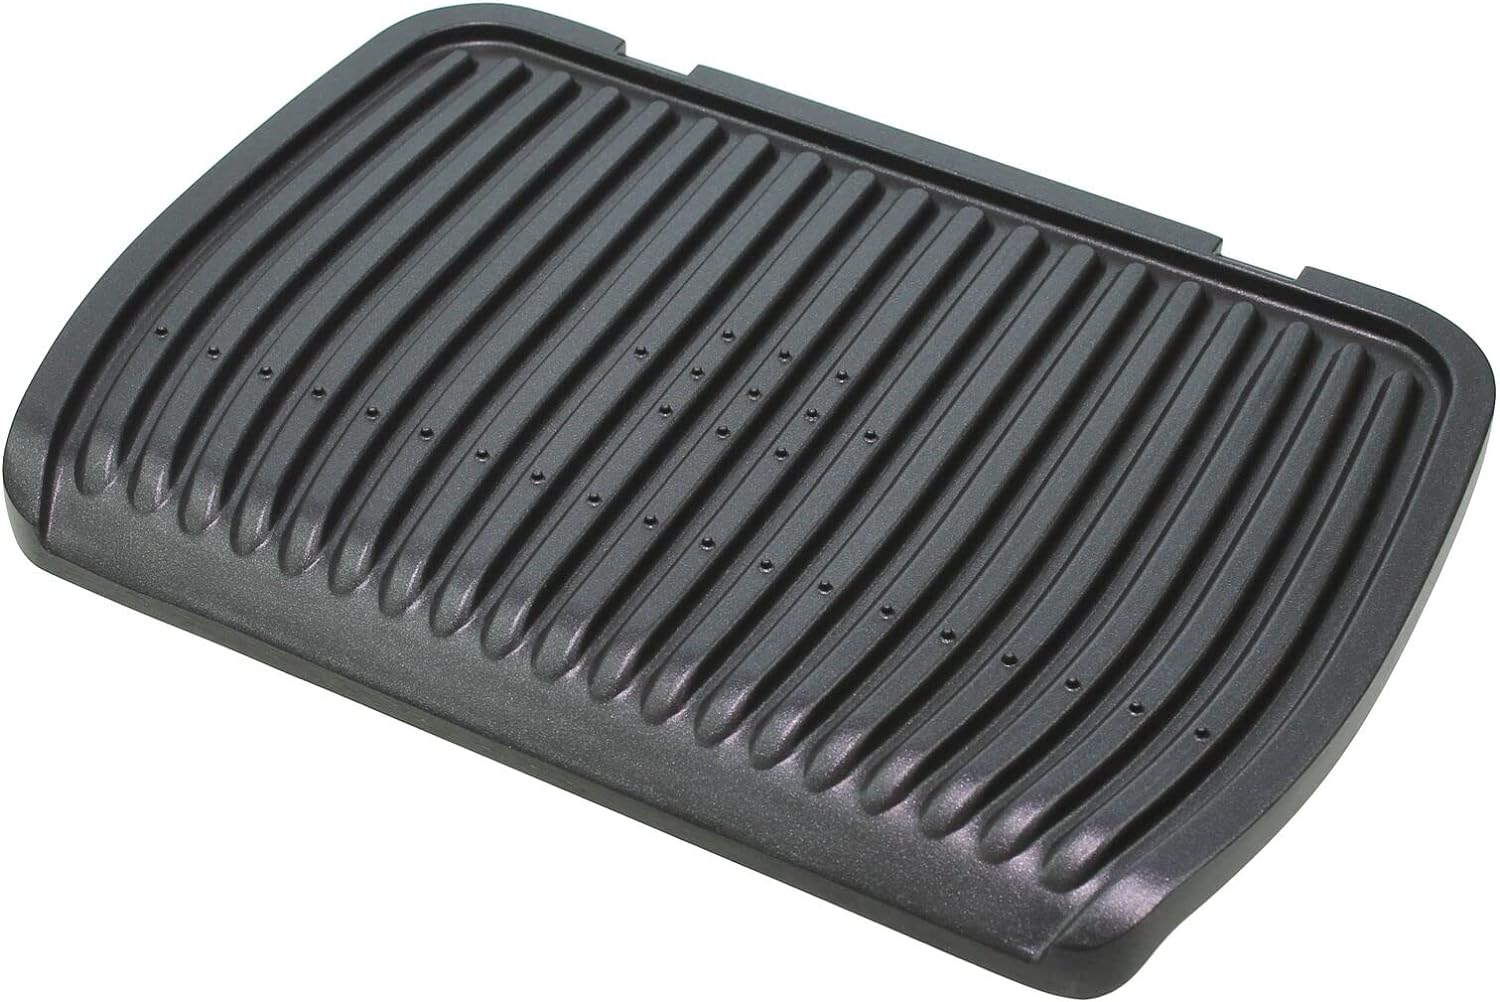 Group SEB Grill plate bottom compatible with/replacement part for Tefal TS-01043490 GC750D OptiGrill contact grill